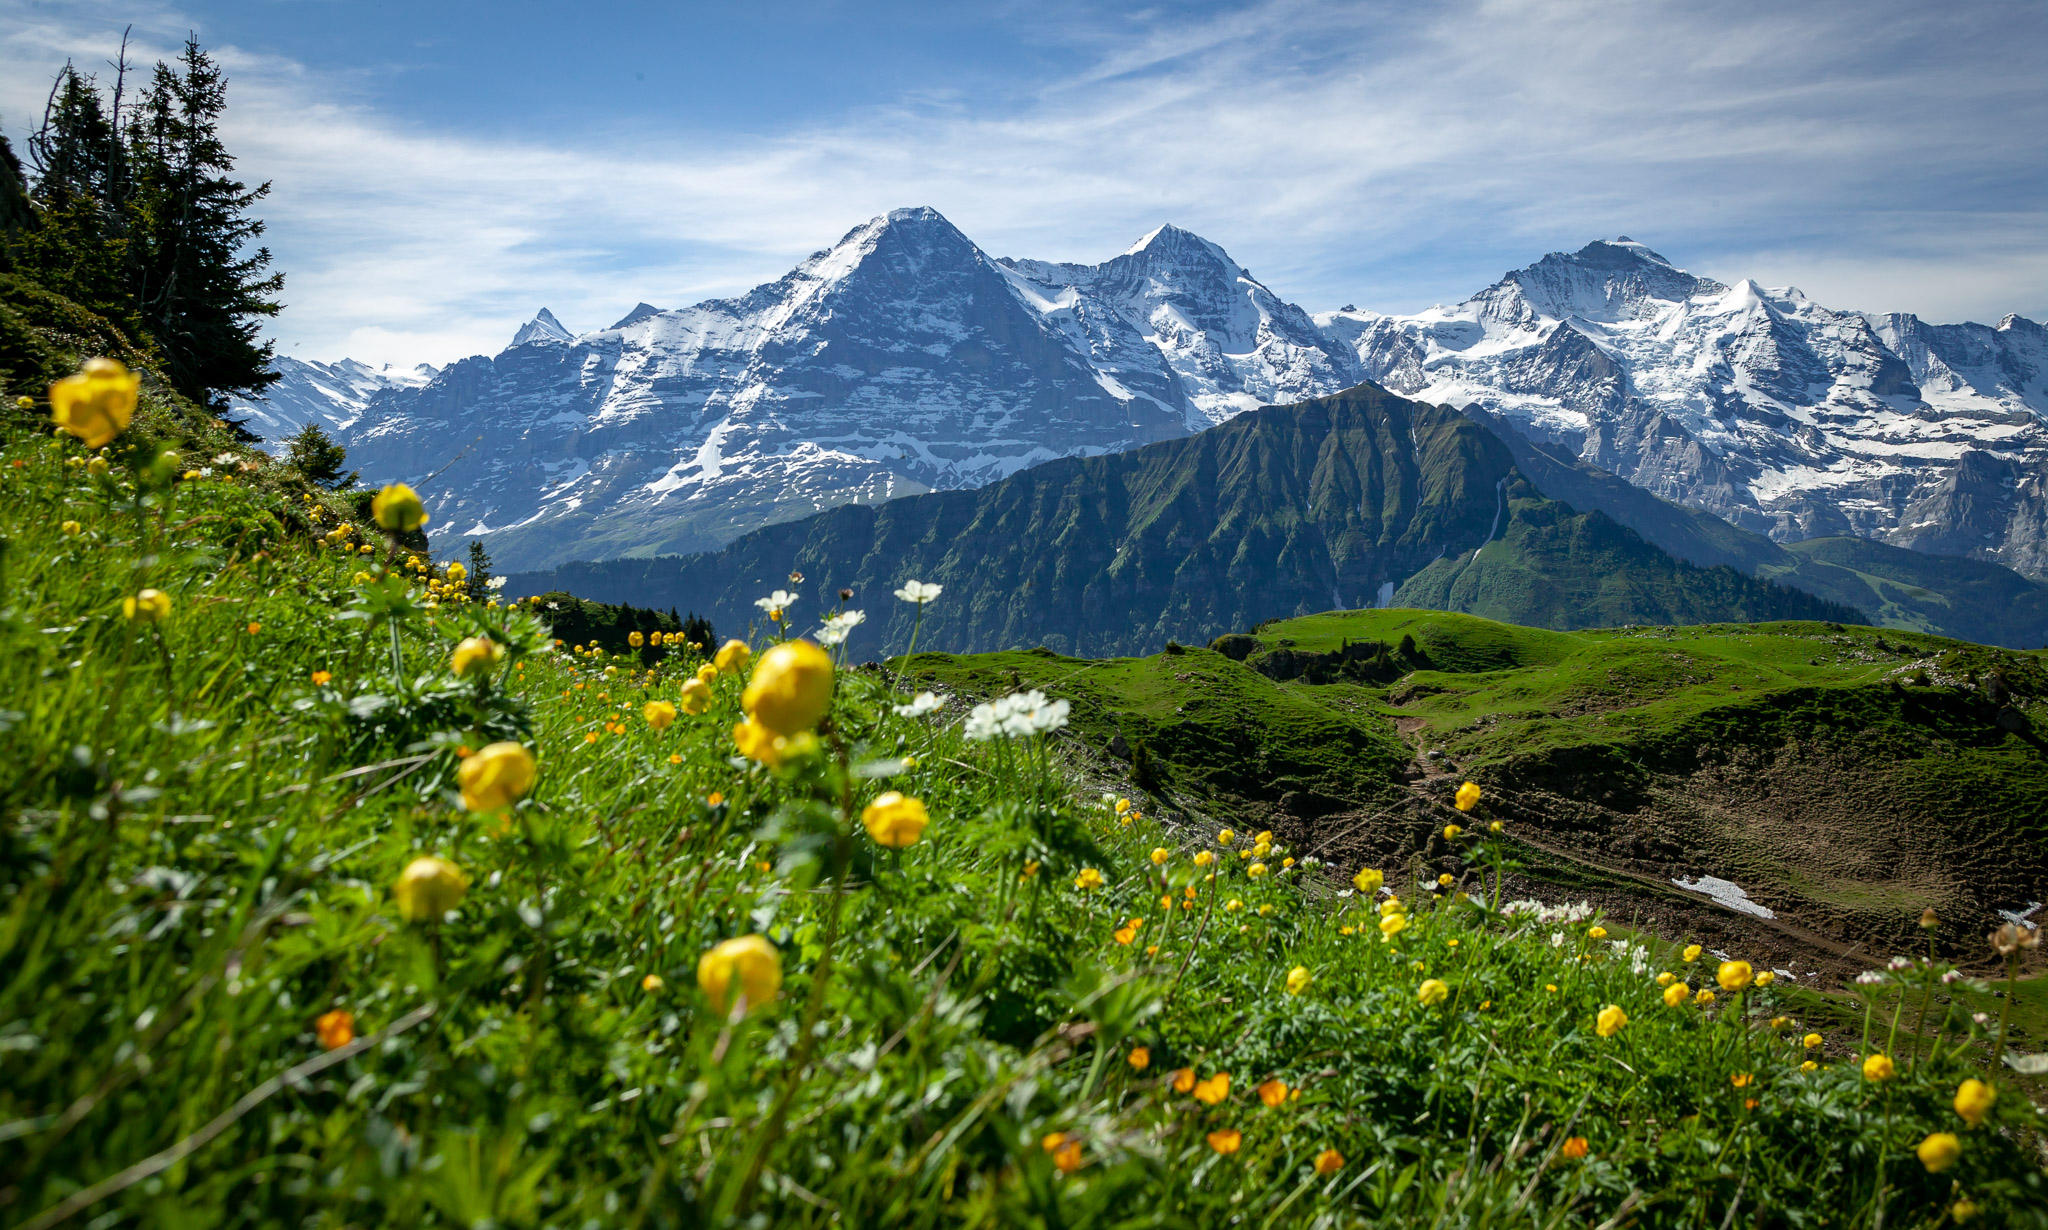 View along Schynige Platte-First-Grindelwald hike